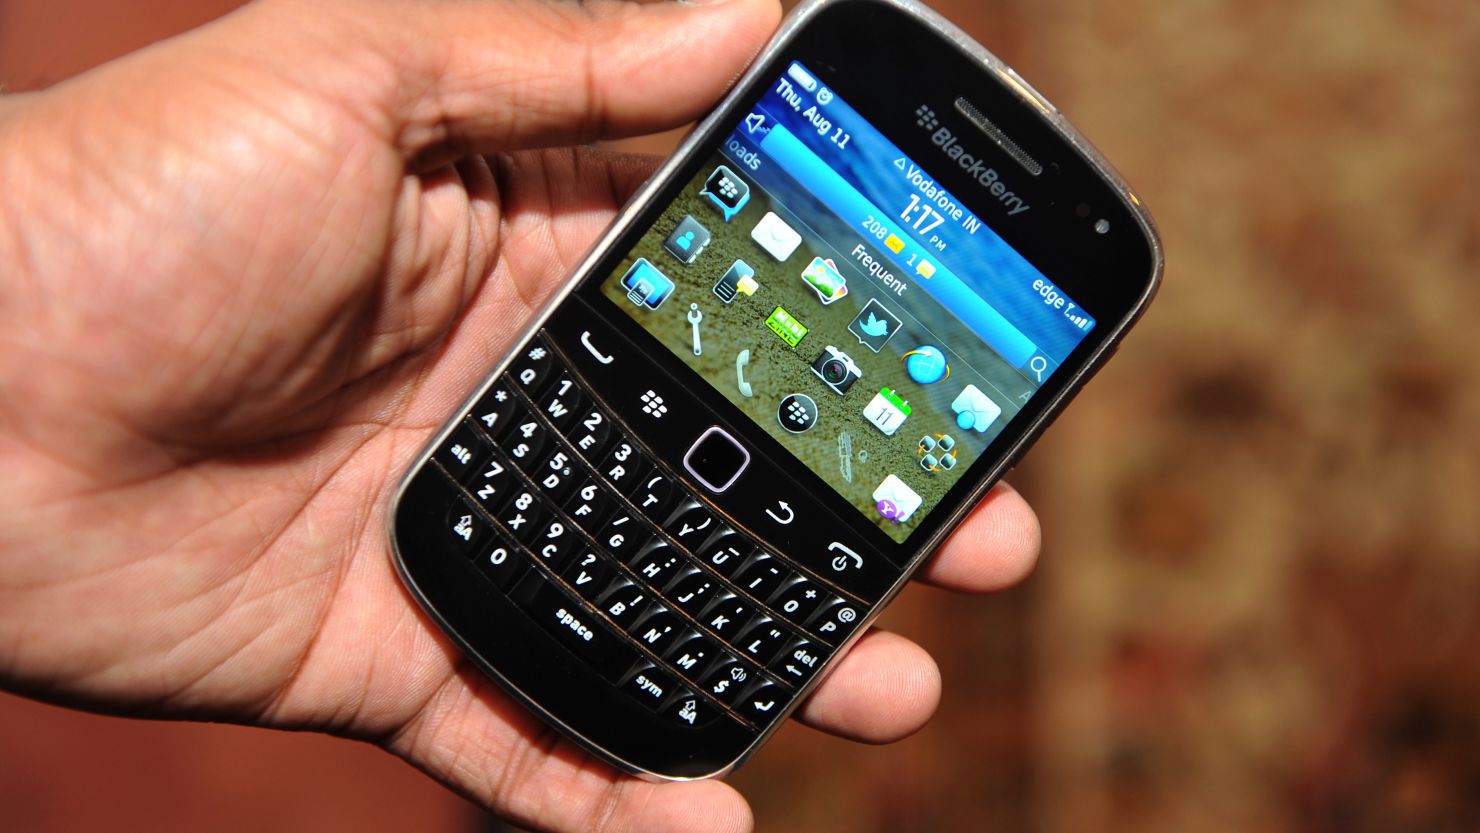 BlackBerry maker RIM described the rumors that is pulling out of the consumer market as wholly inaccurate.